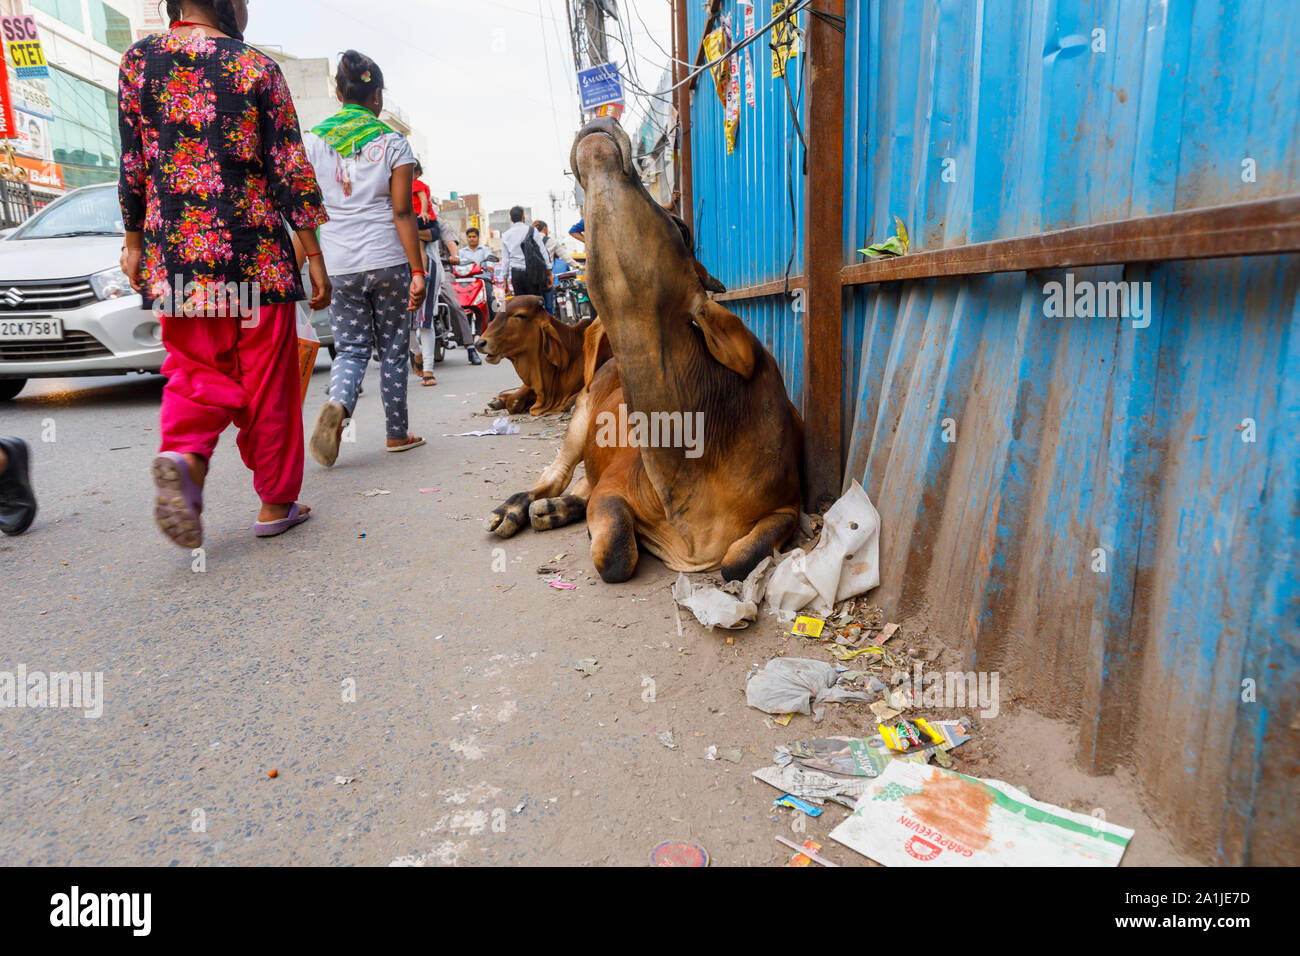 Street scene with typical sacred cows lying on the roadside in Mahipalpur district, a suburb near Delhi Airport in New Delhi, capital city of India Stock Photo